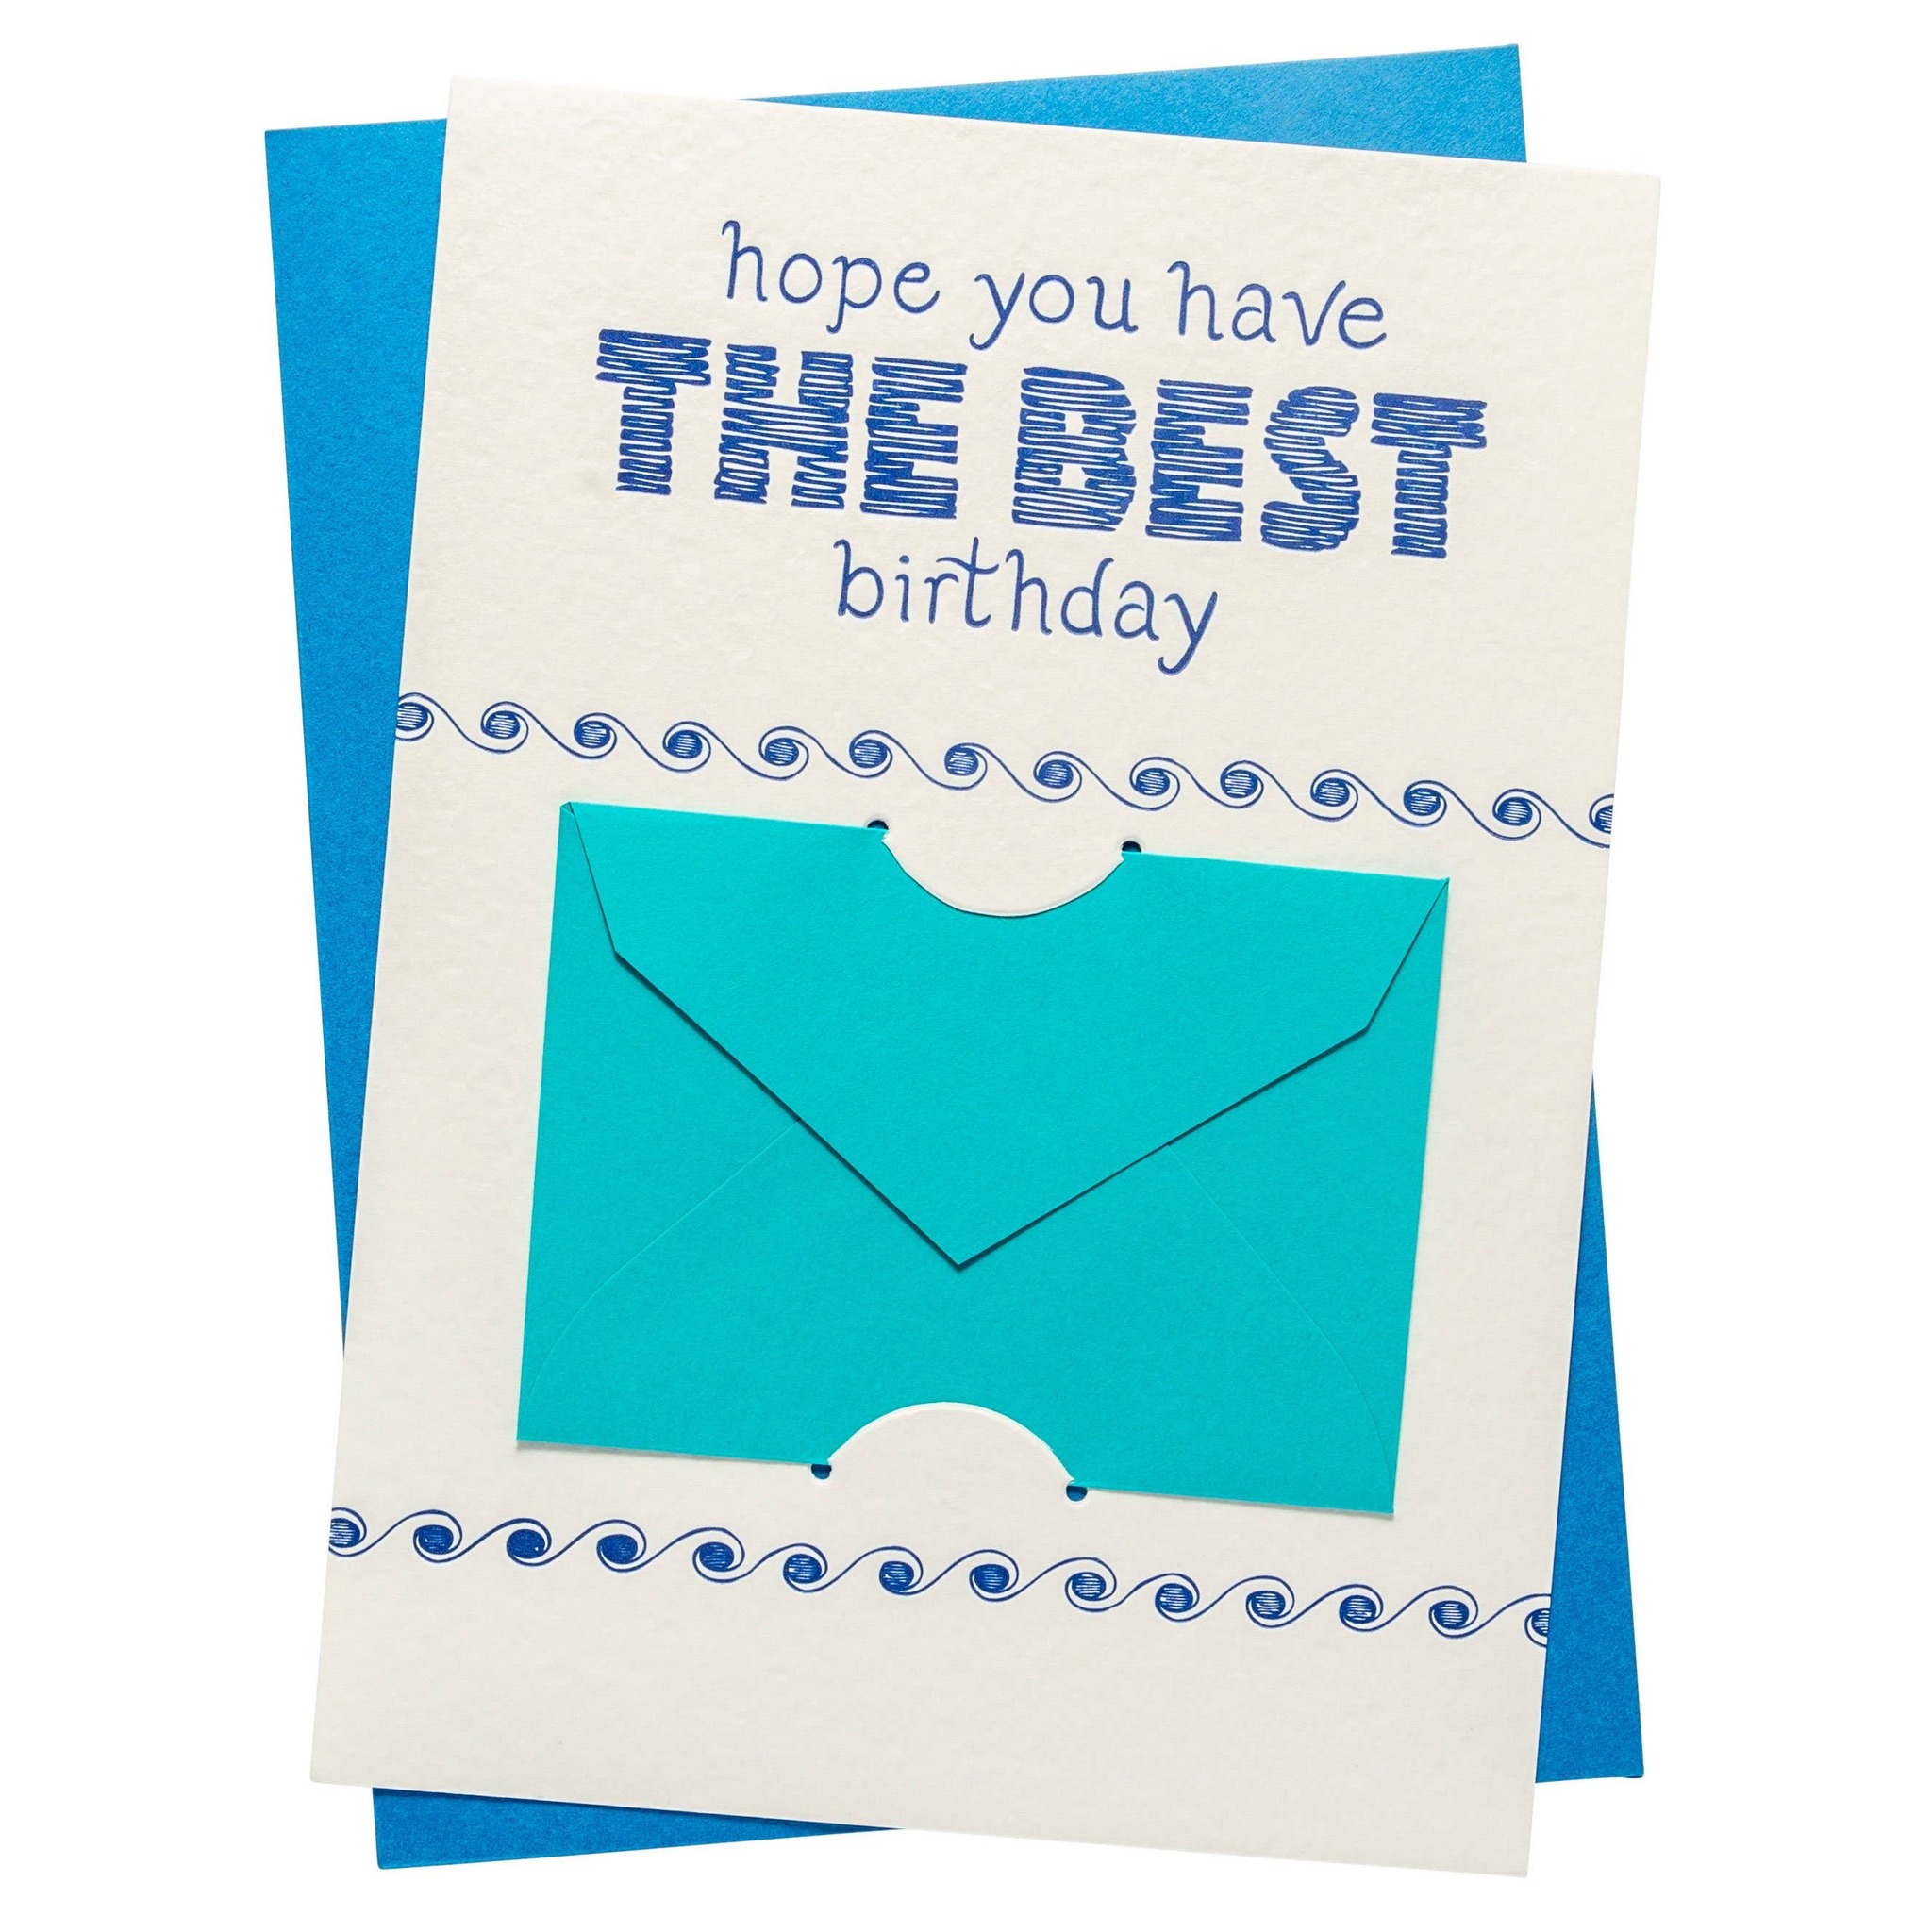 Colorbox Design - Birthday Gift Card